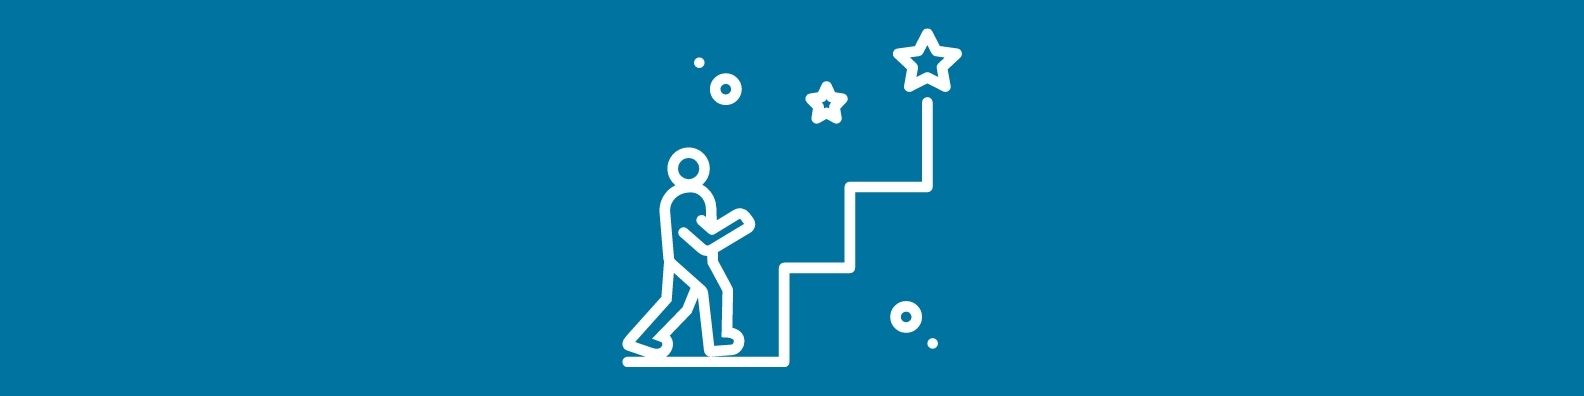 A decorative graphic. The background is a shade of blue with a white graphic of a person climing stairs to reach a star at the top stair is in the centre.